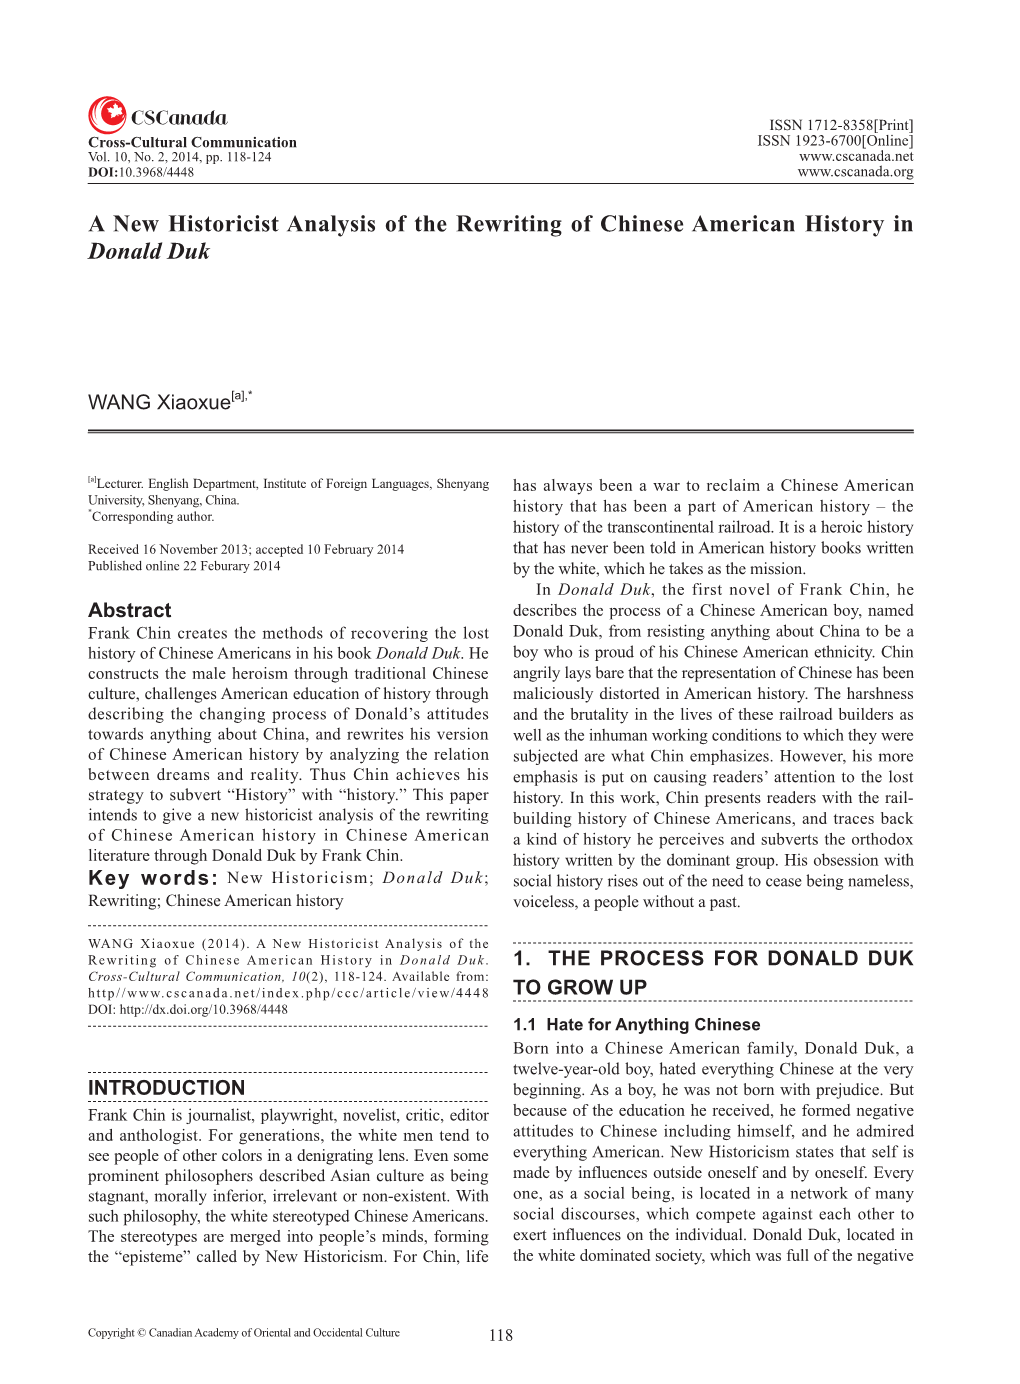 A New Historicist Analysis of the Rewriting of Chinese American History in Donald Duk